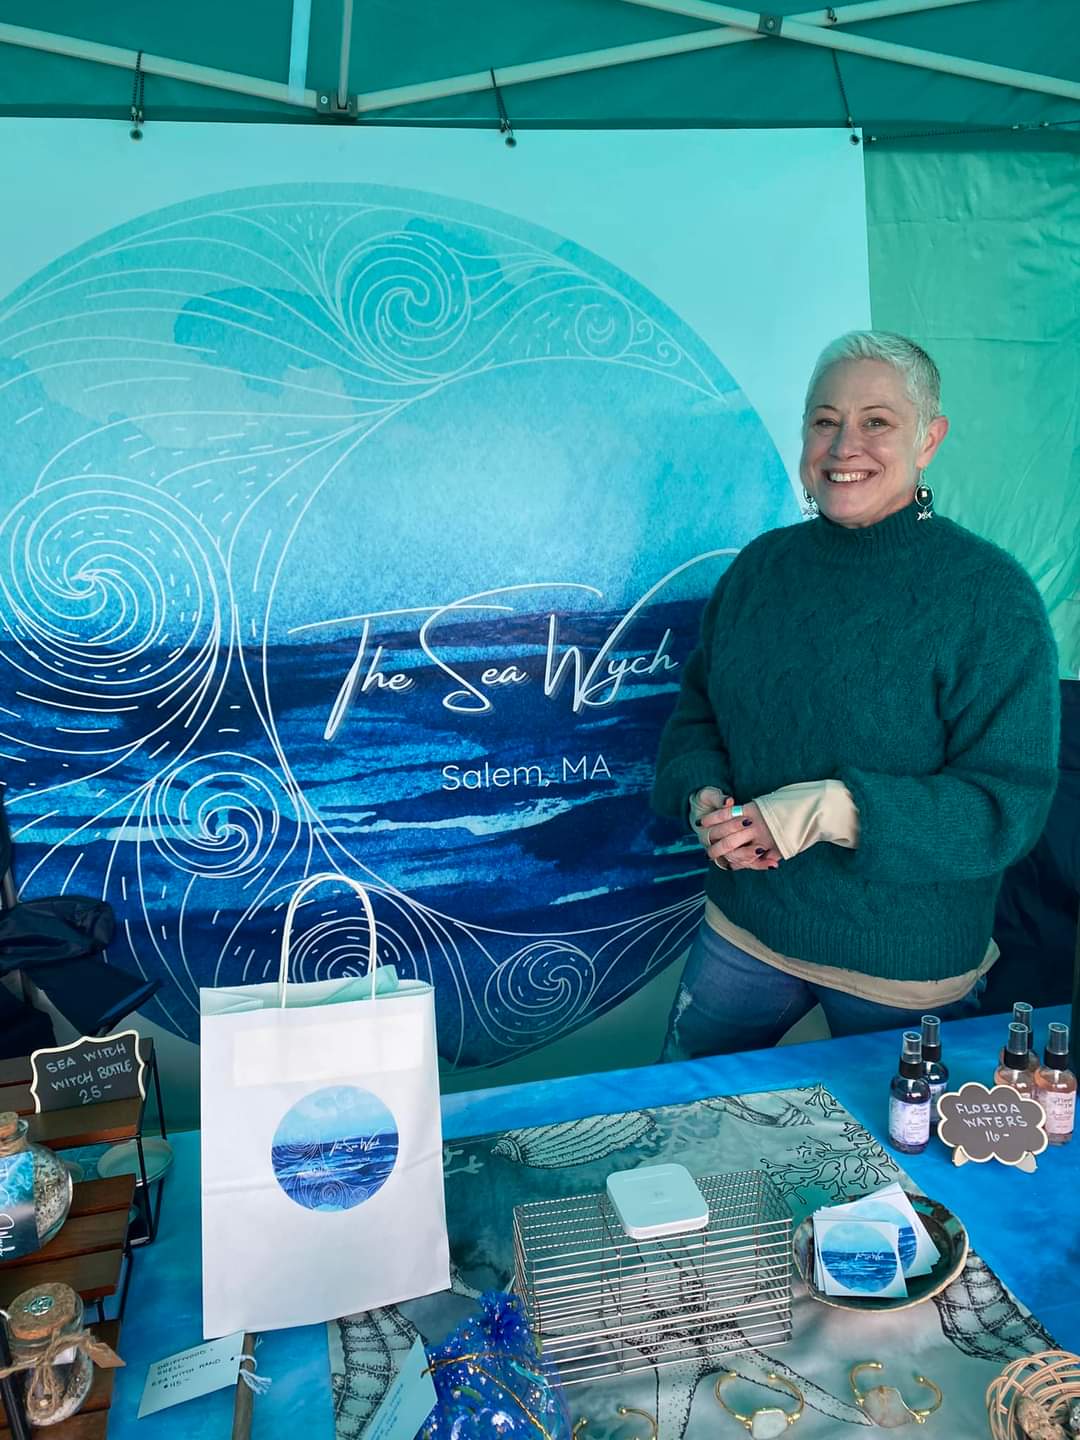 Experience the joy of shopping with a friendly seller at "The Sea Witch" in Salem, MA. Discover products displayed in a booth adorned with unique ocean-themed décor.